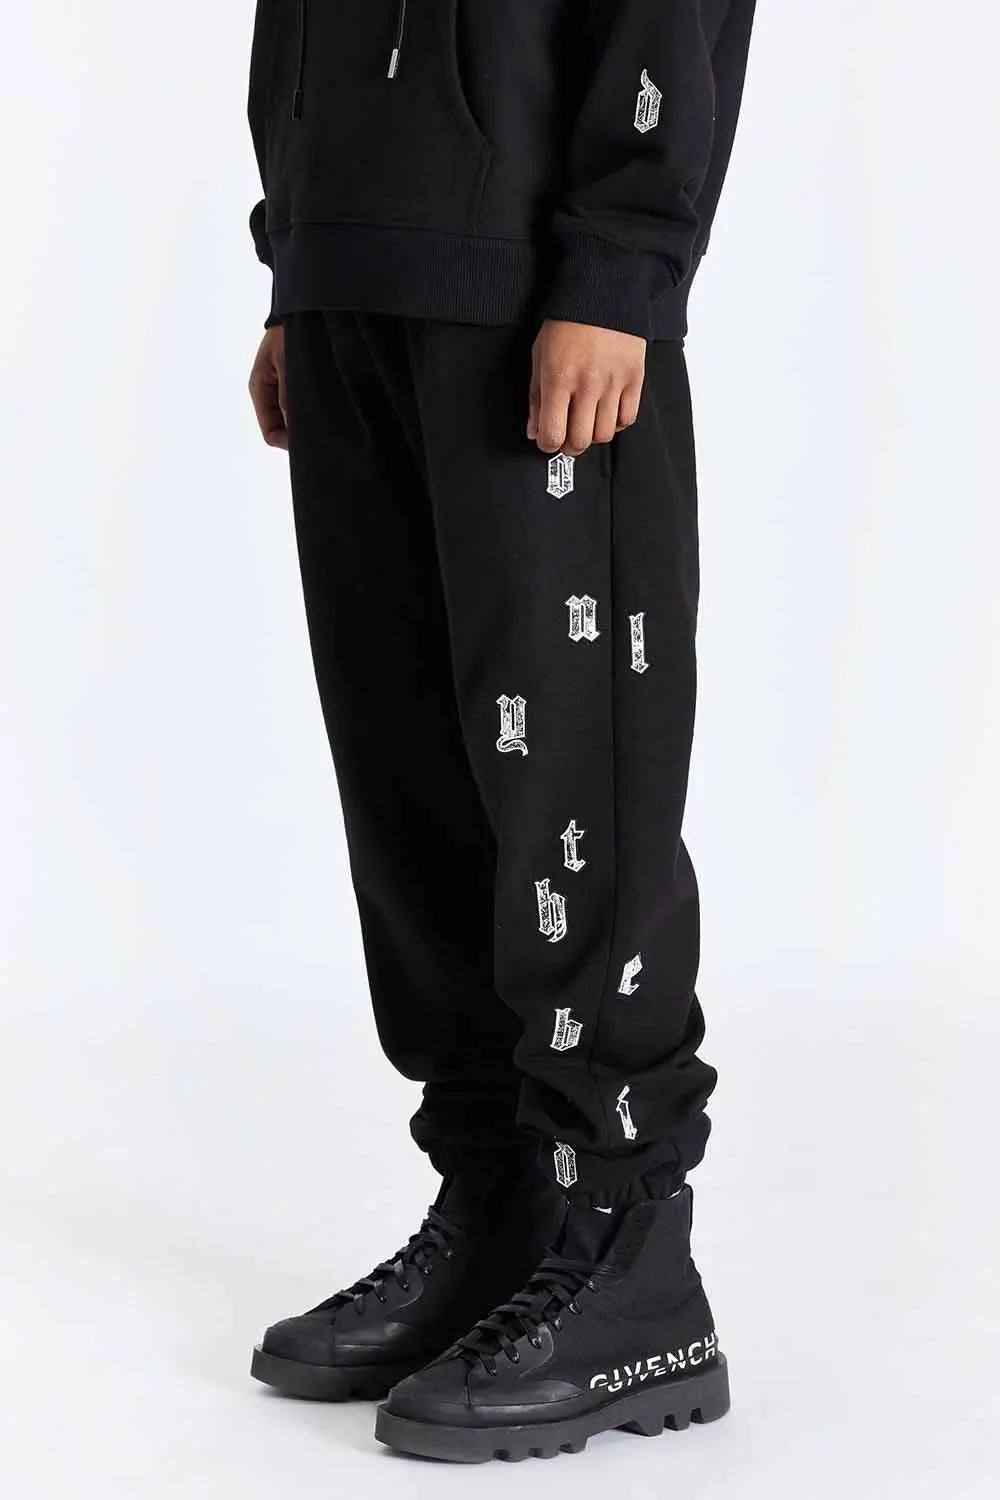 Made On Earth Double Jersey Sweatpants Faded Black